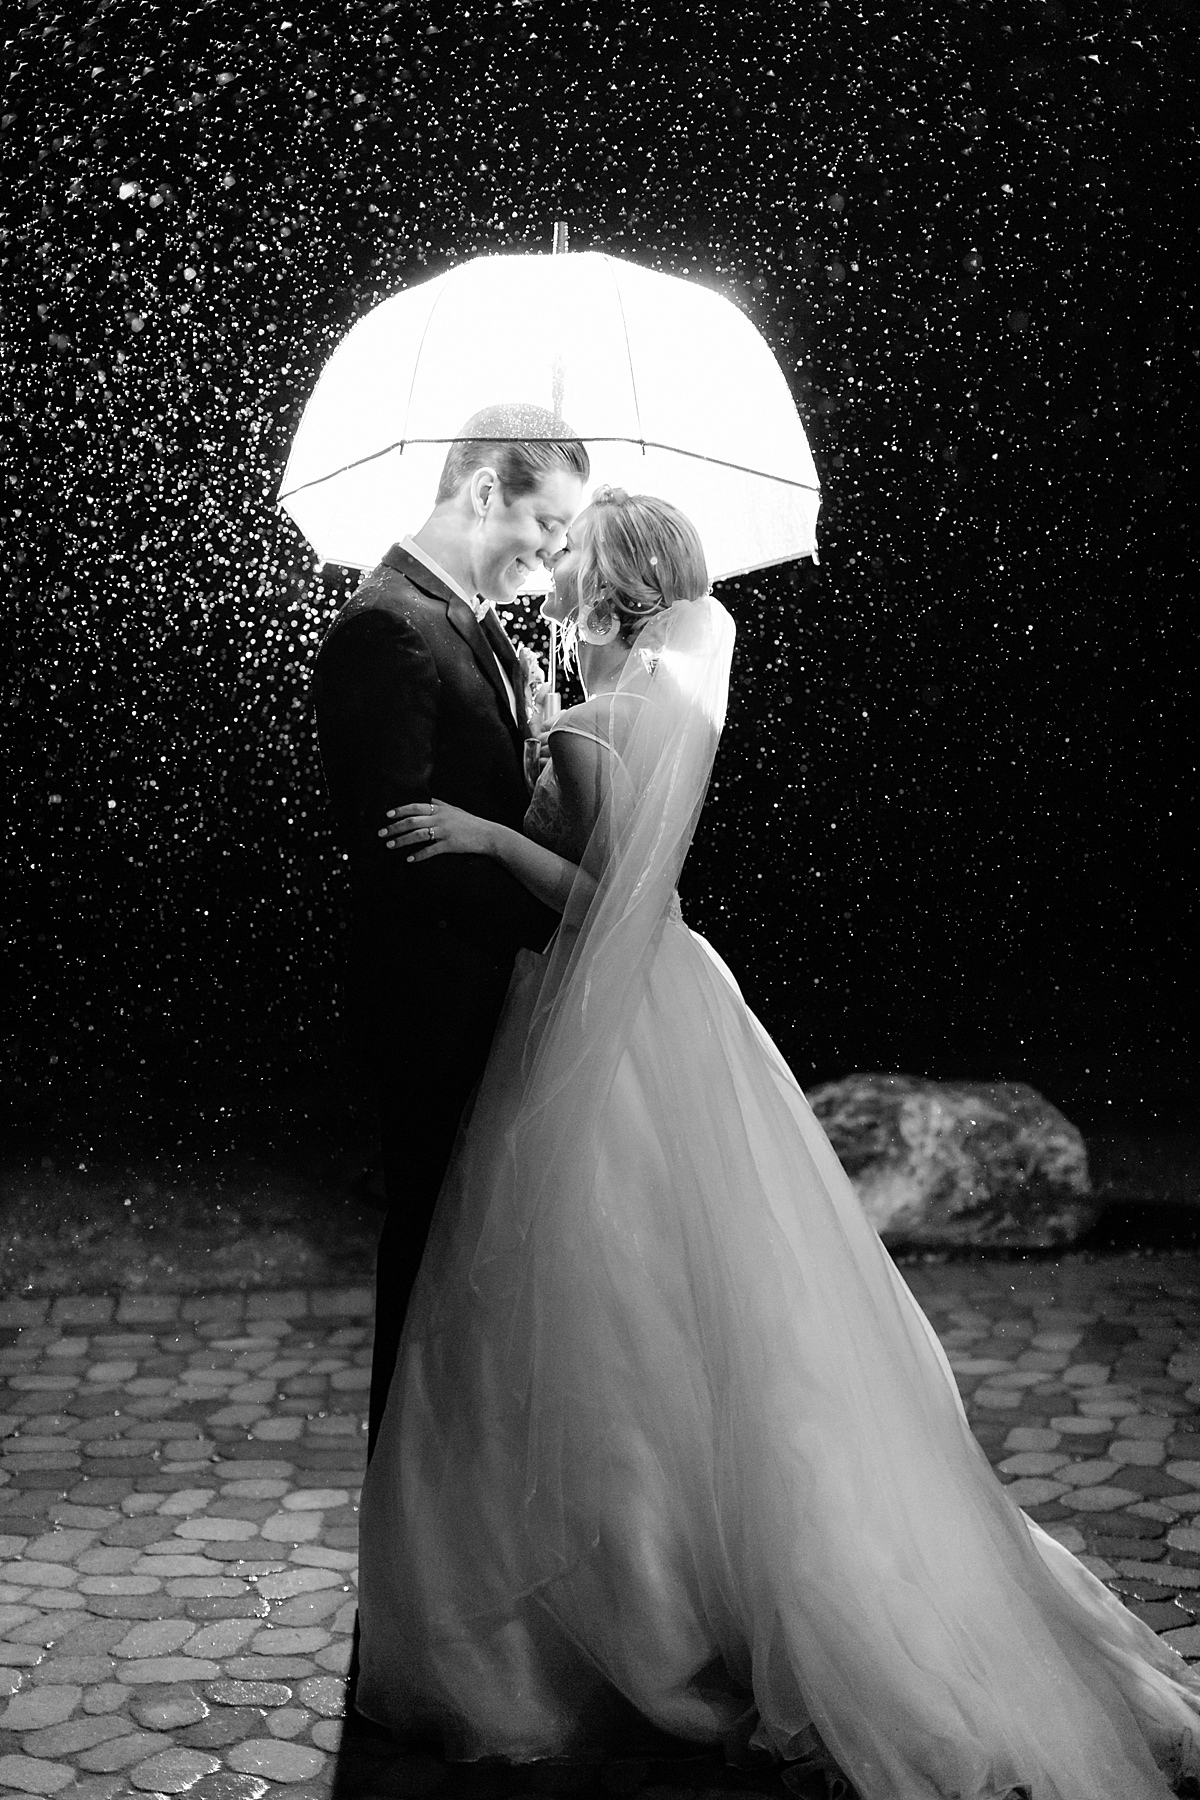 Oyster Ridge wedding photo of bride and groom in the rain at night by Tayler Enerle